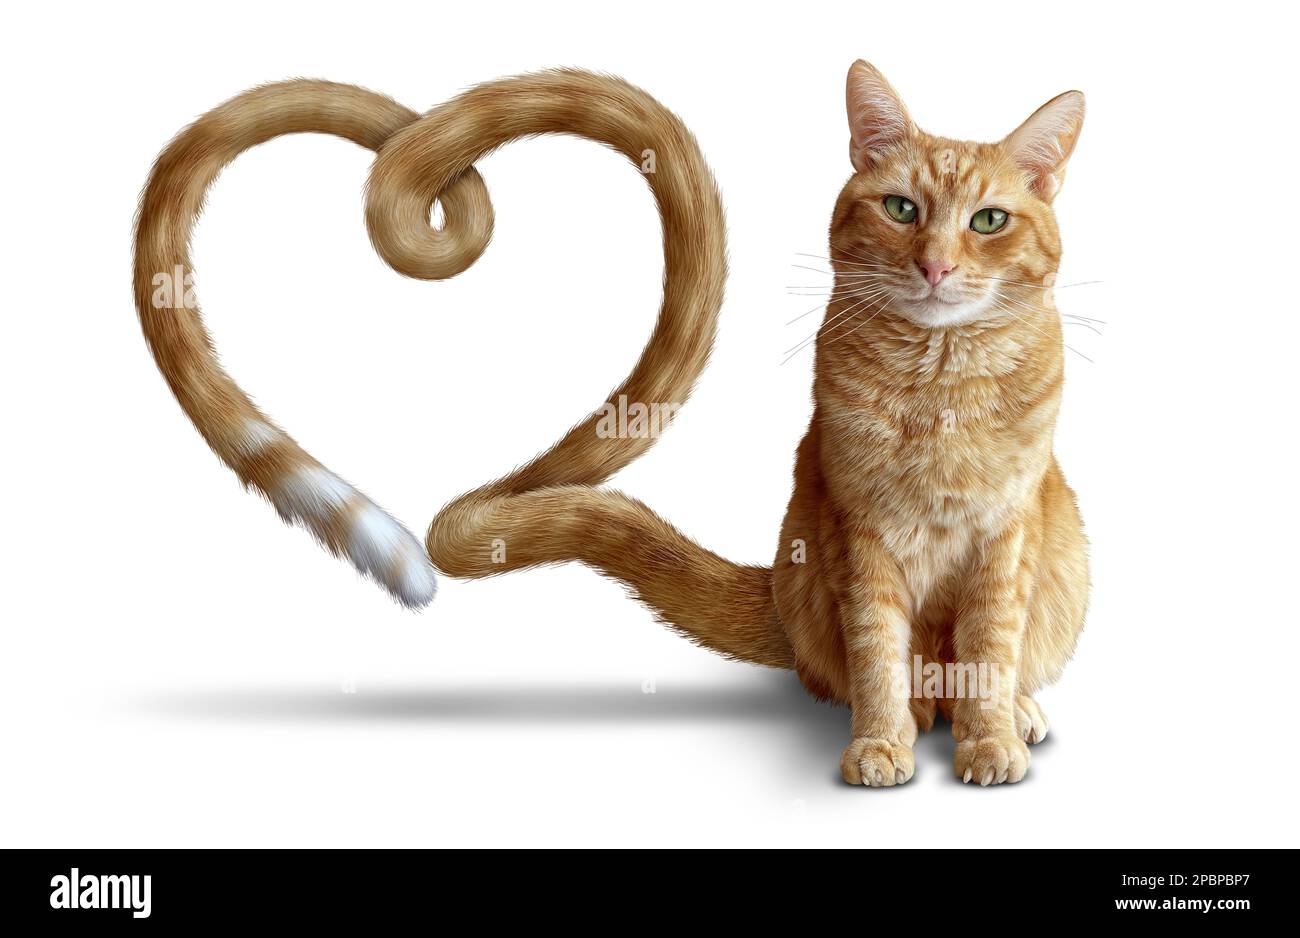 Cat love as a symbol of feline health care and veterinary therapy as a Ginger Cat or a cute tabby with a heart shape for healthy pets. Stock Photo